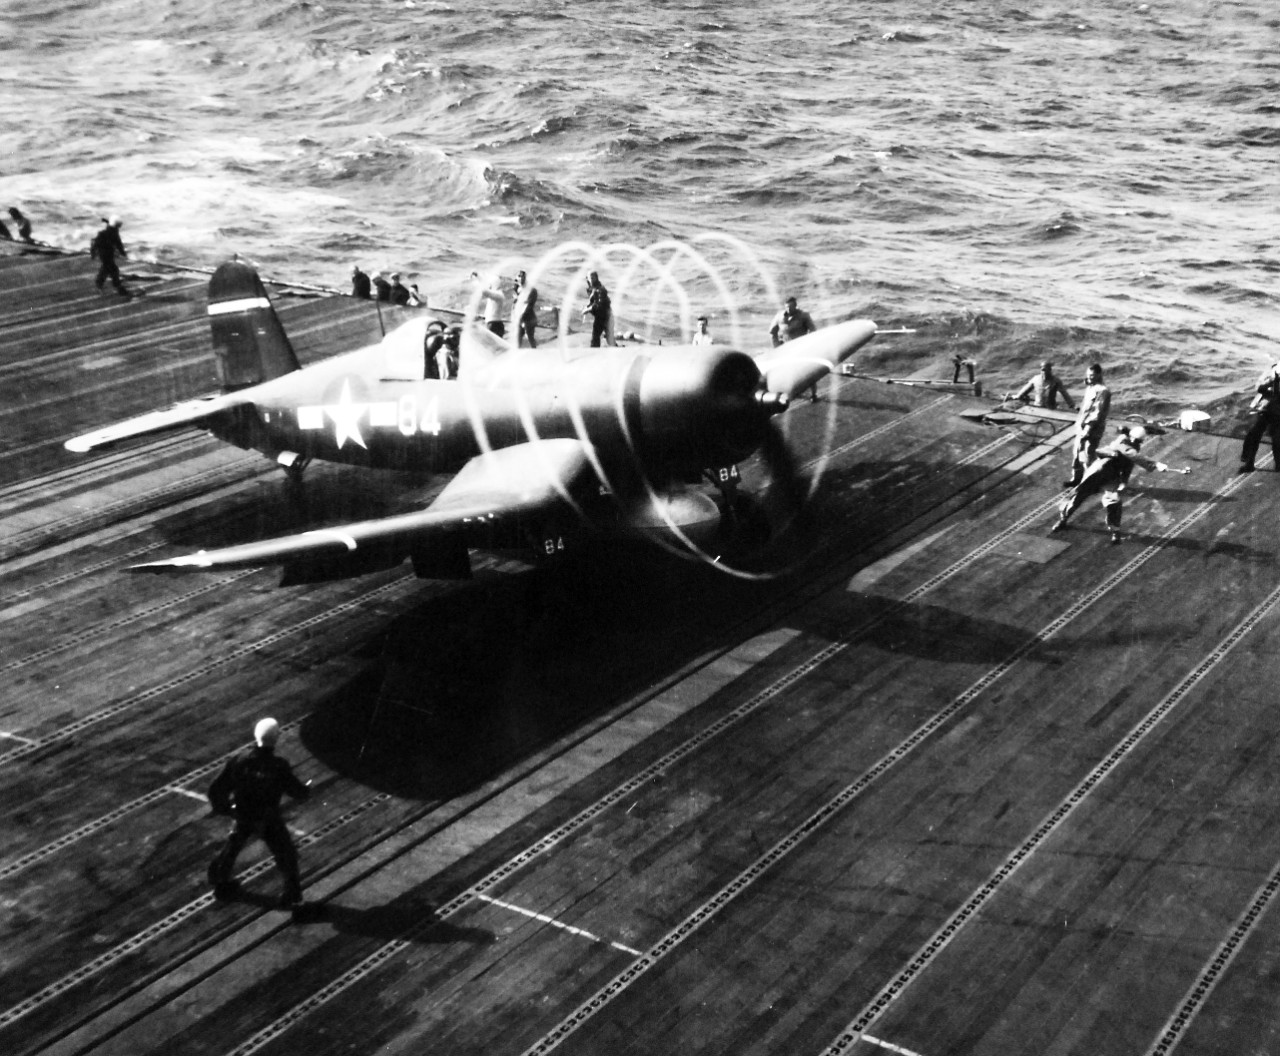 80-G-413974:  Vought F4U Corsair, December 1944.  F4U’s spinning propeller cuts circles of vapors on a damp day in the Pacific as it moves up the deck for take-off against Formosa.  Steichen Photograph Unit, TR-12925.   Photograph released December 1944.   Official U.S. Navy photograph, now in the collections of the National Archives.  